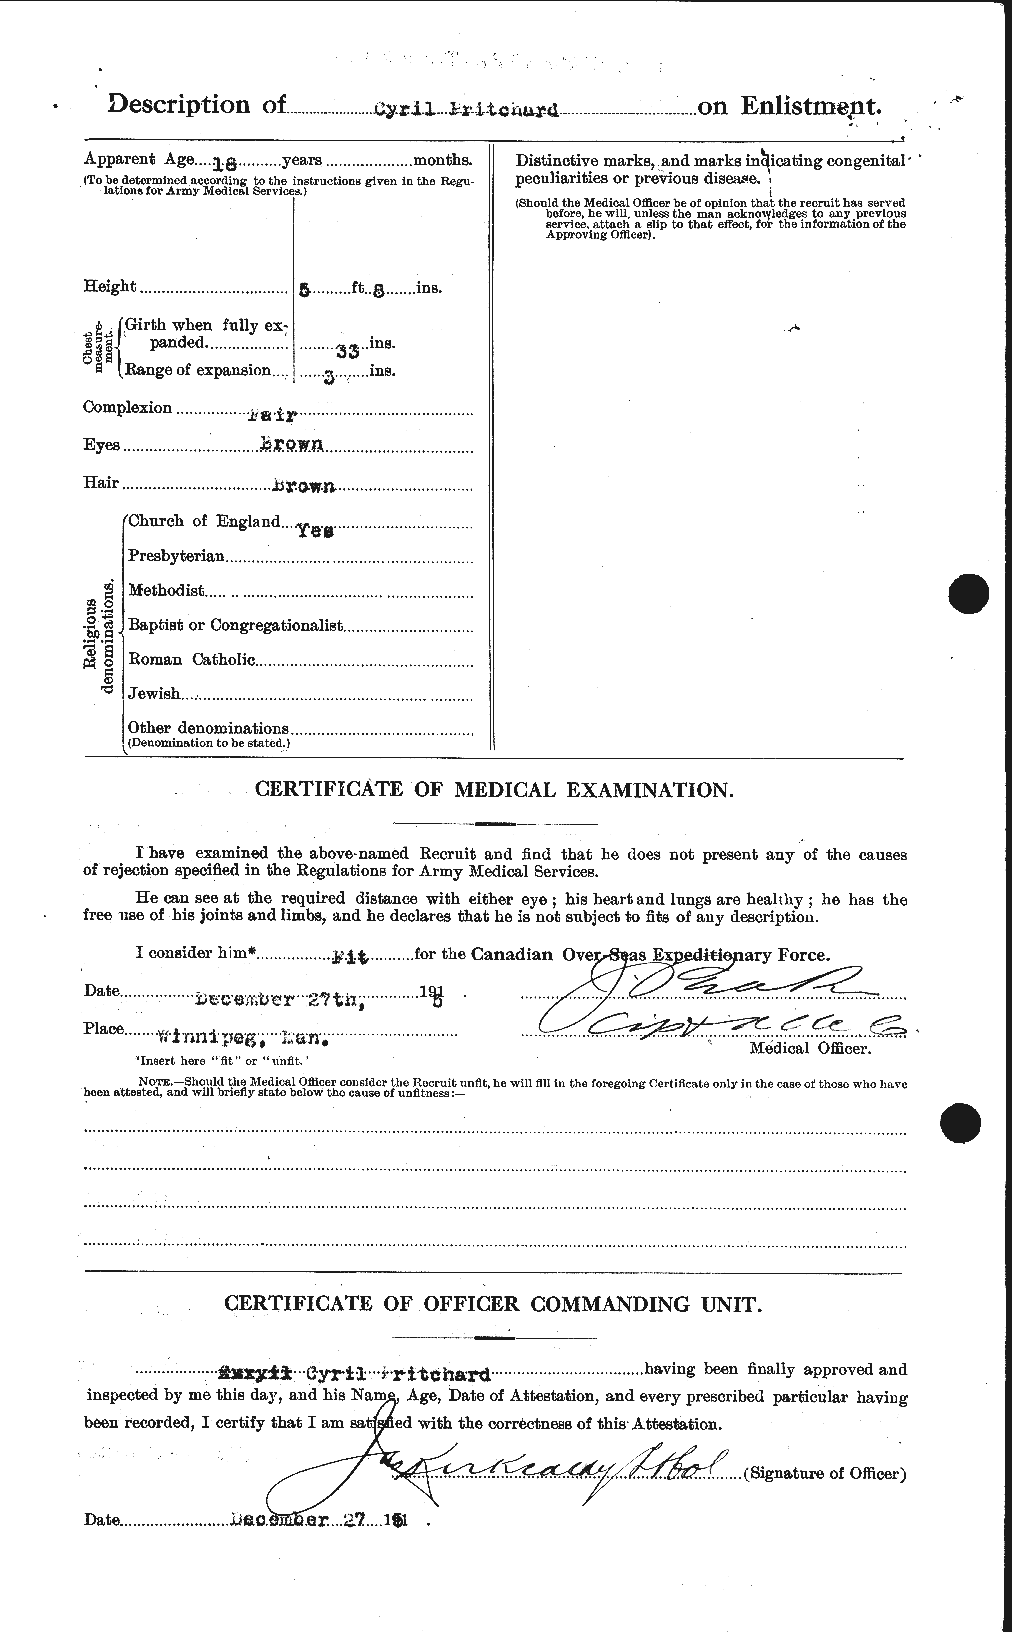 Personnel Records of the First World War - CEF 588501b